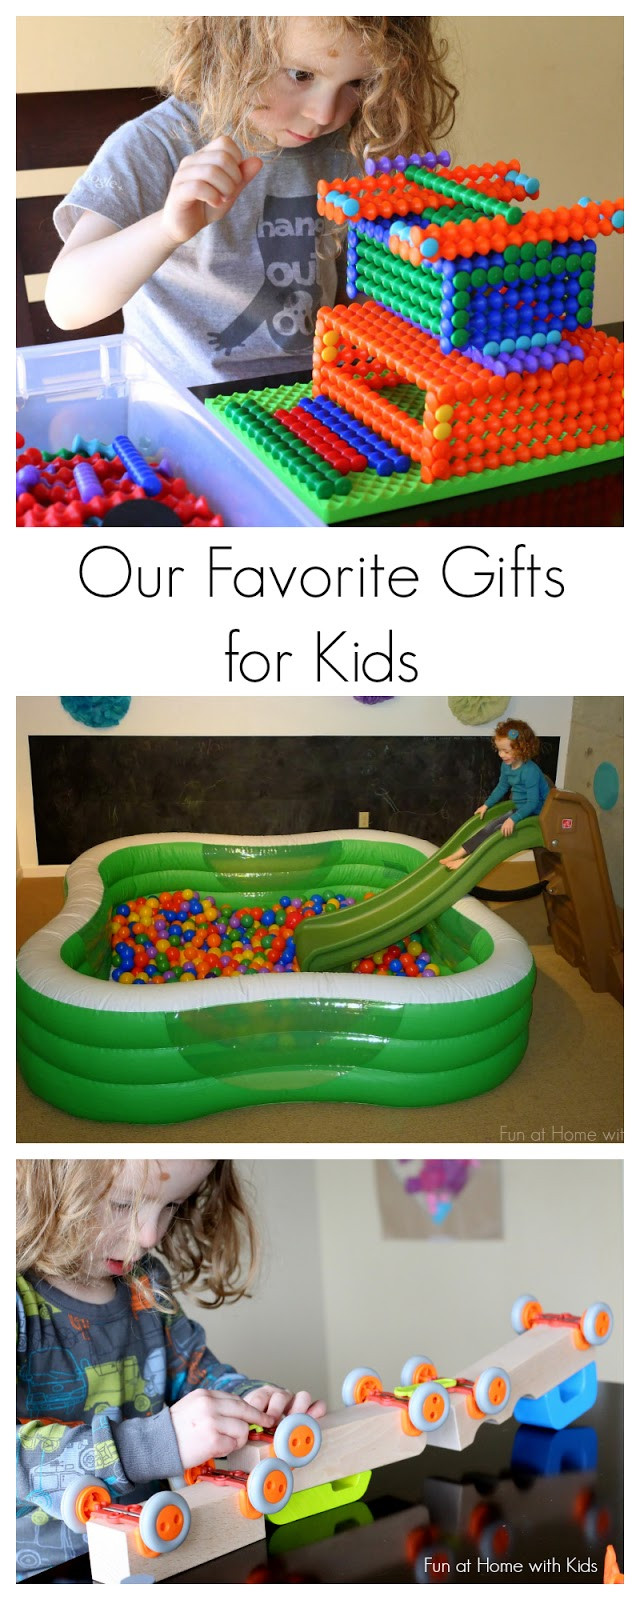 Best Kids Gifts
 Our 10 Best and Favorite Gift Ideas for Kids